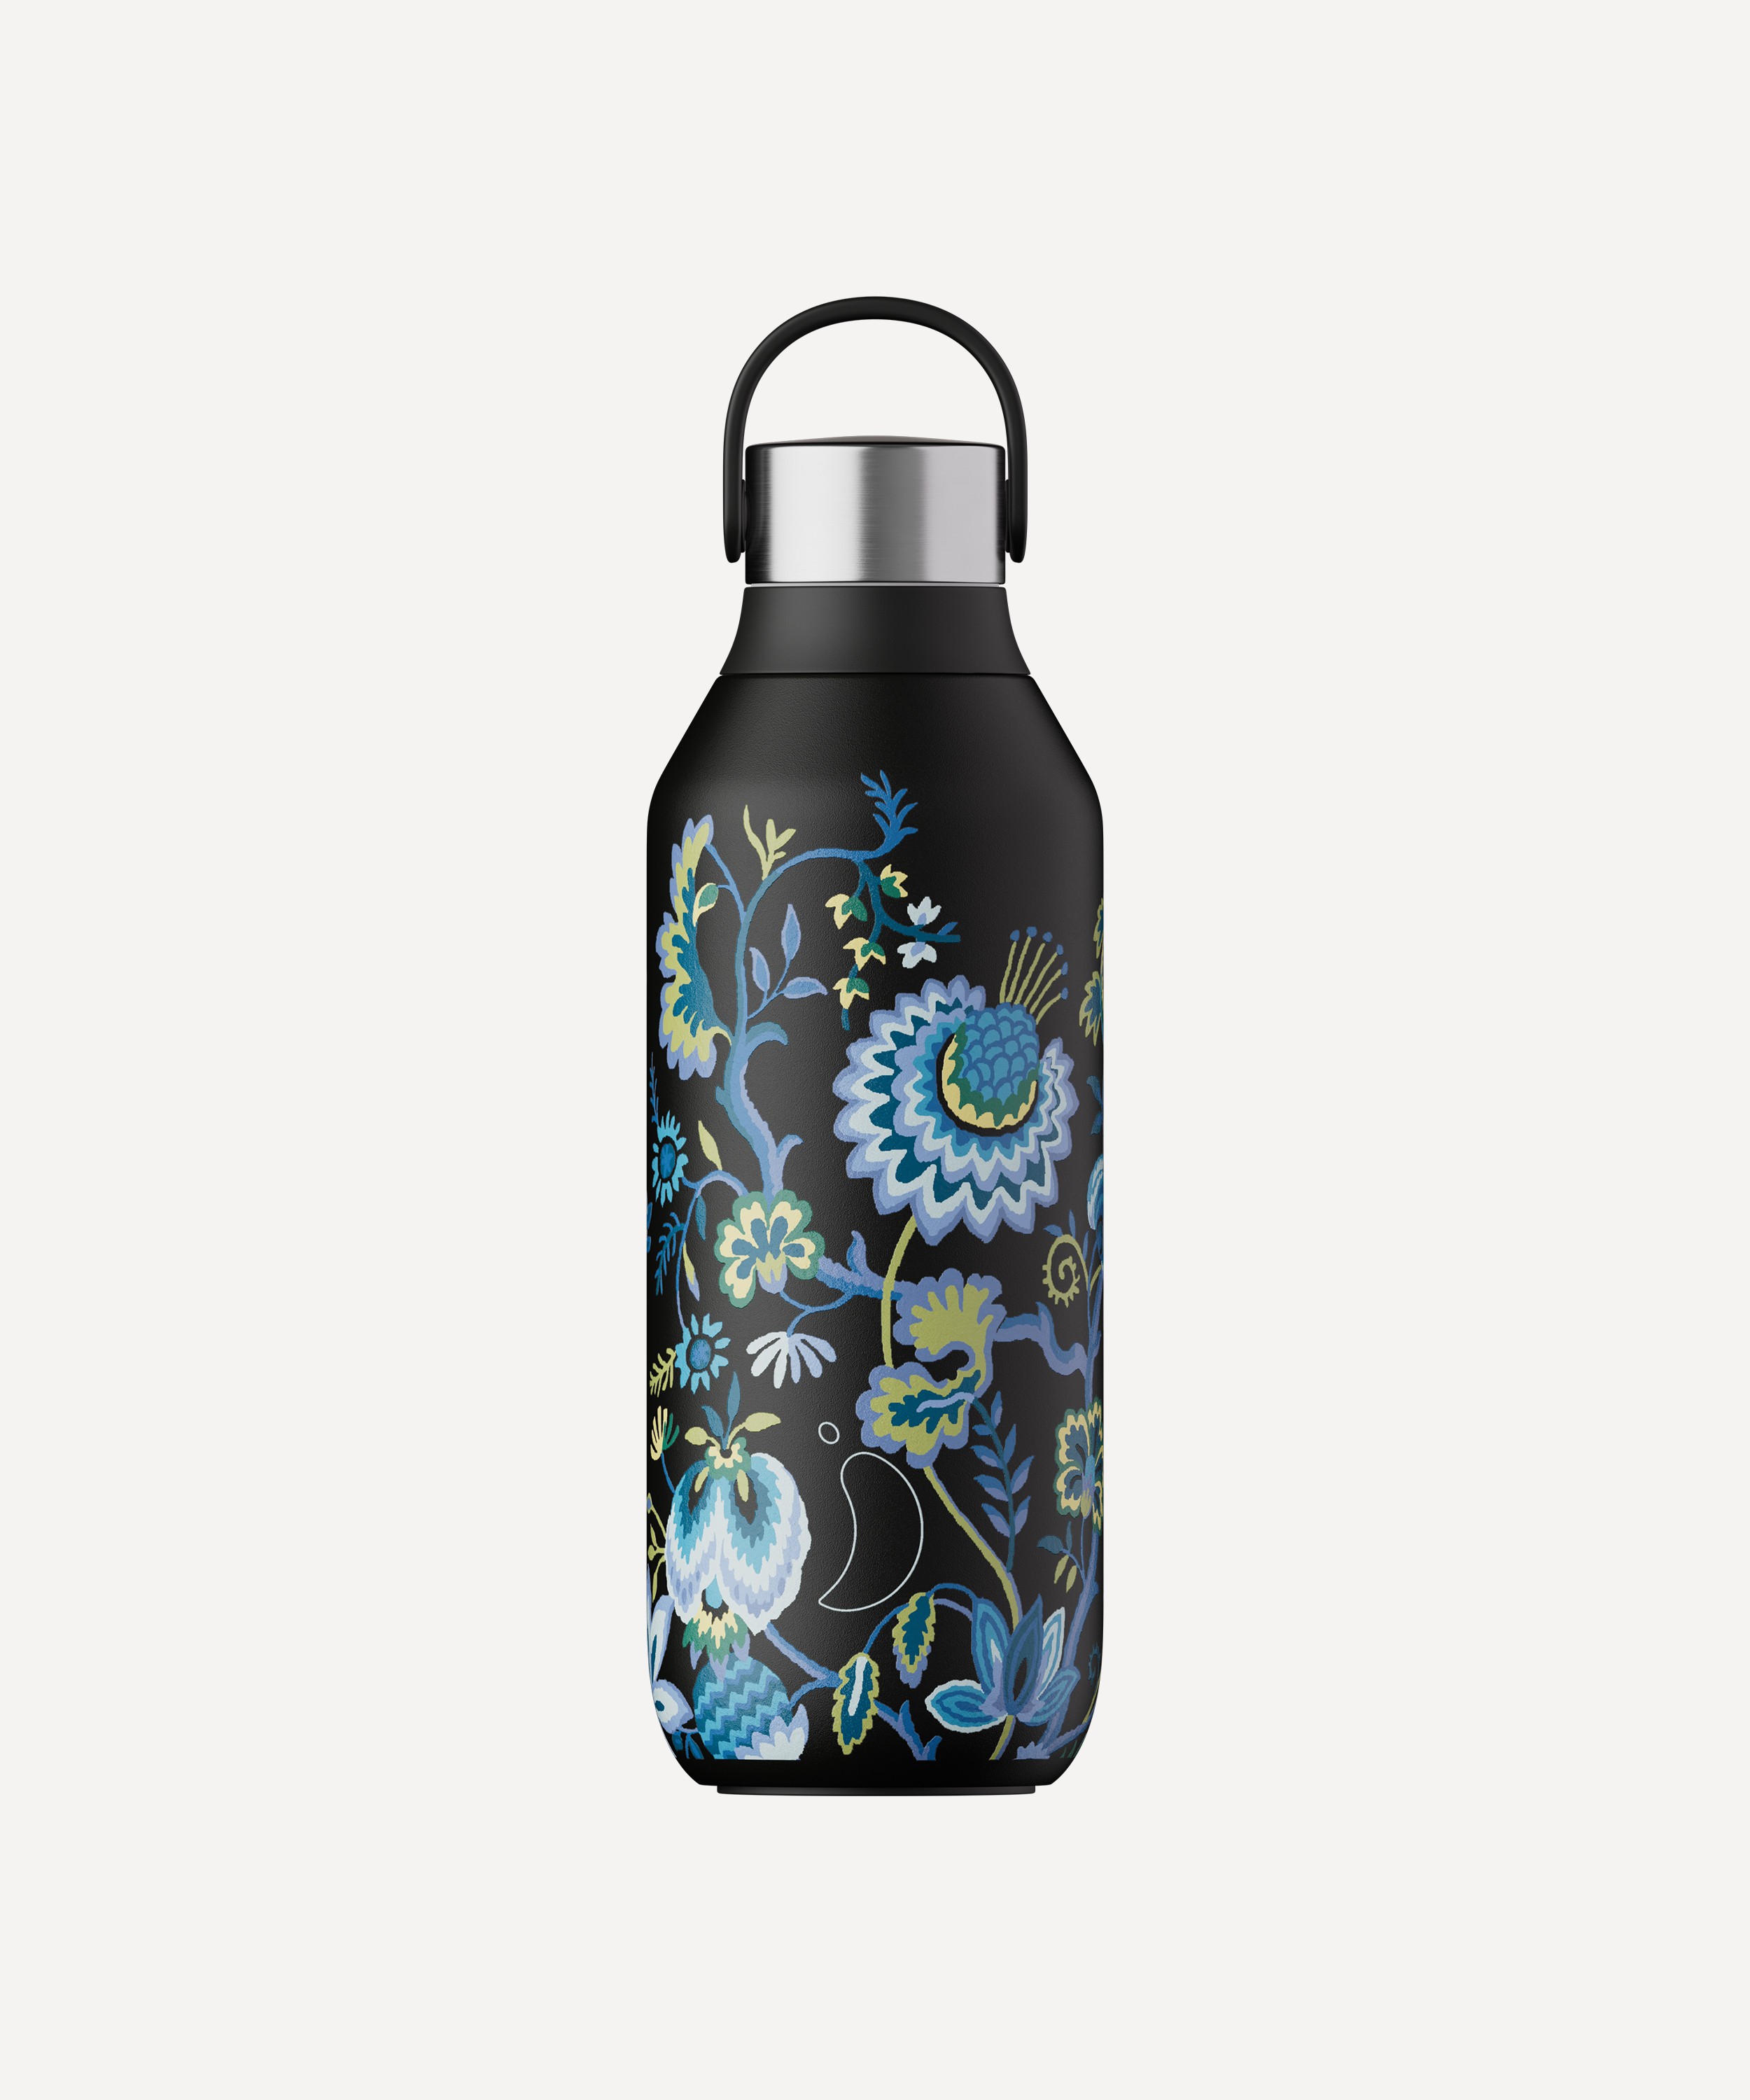 Chilly's - Maelys Vine Series 2 Water Bottle 500ml